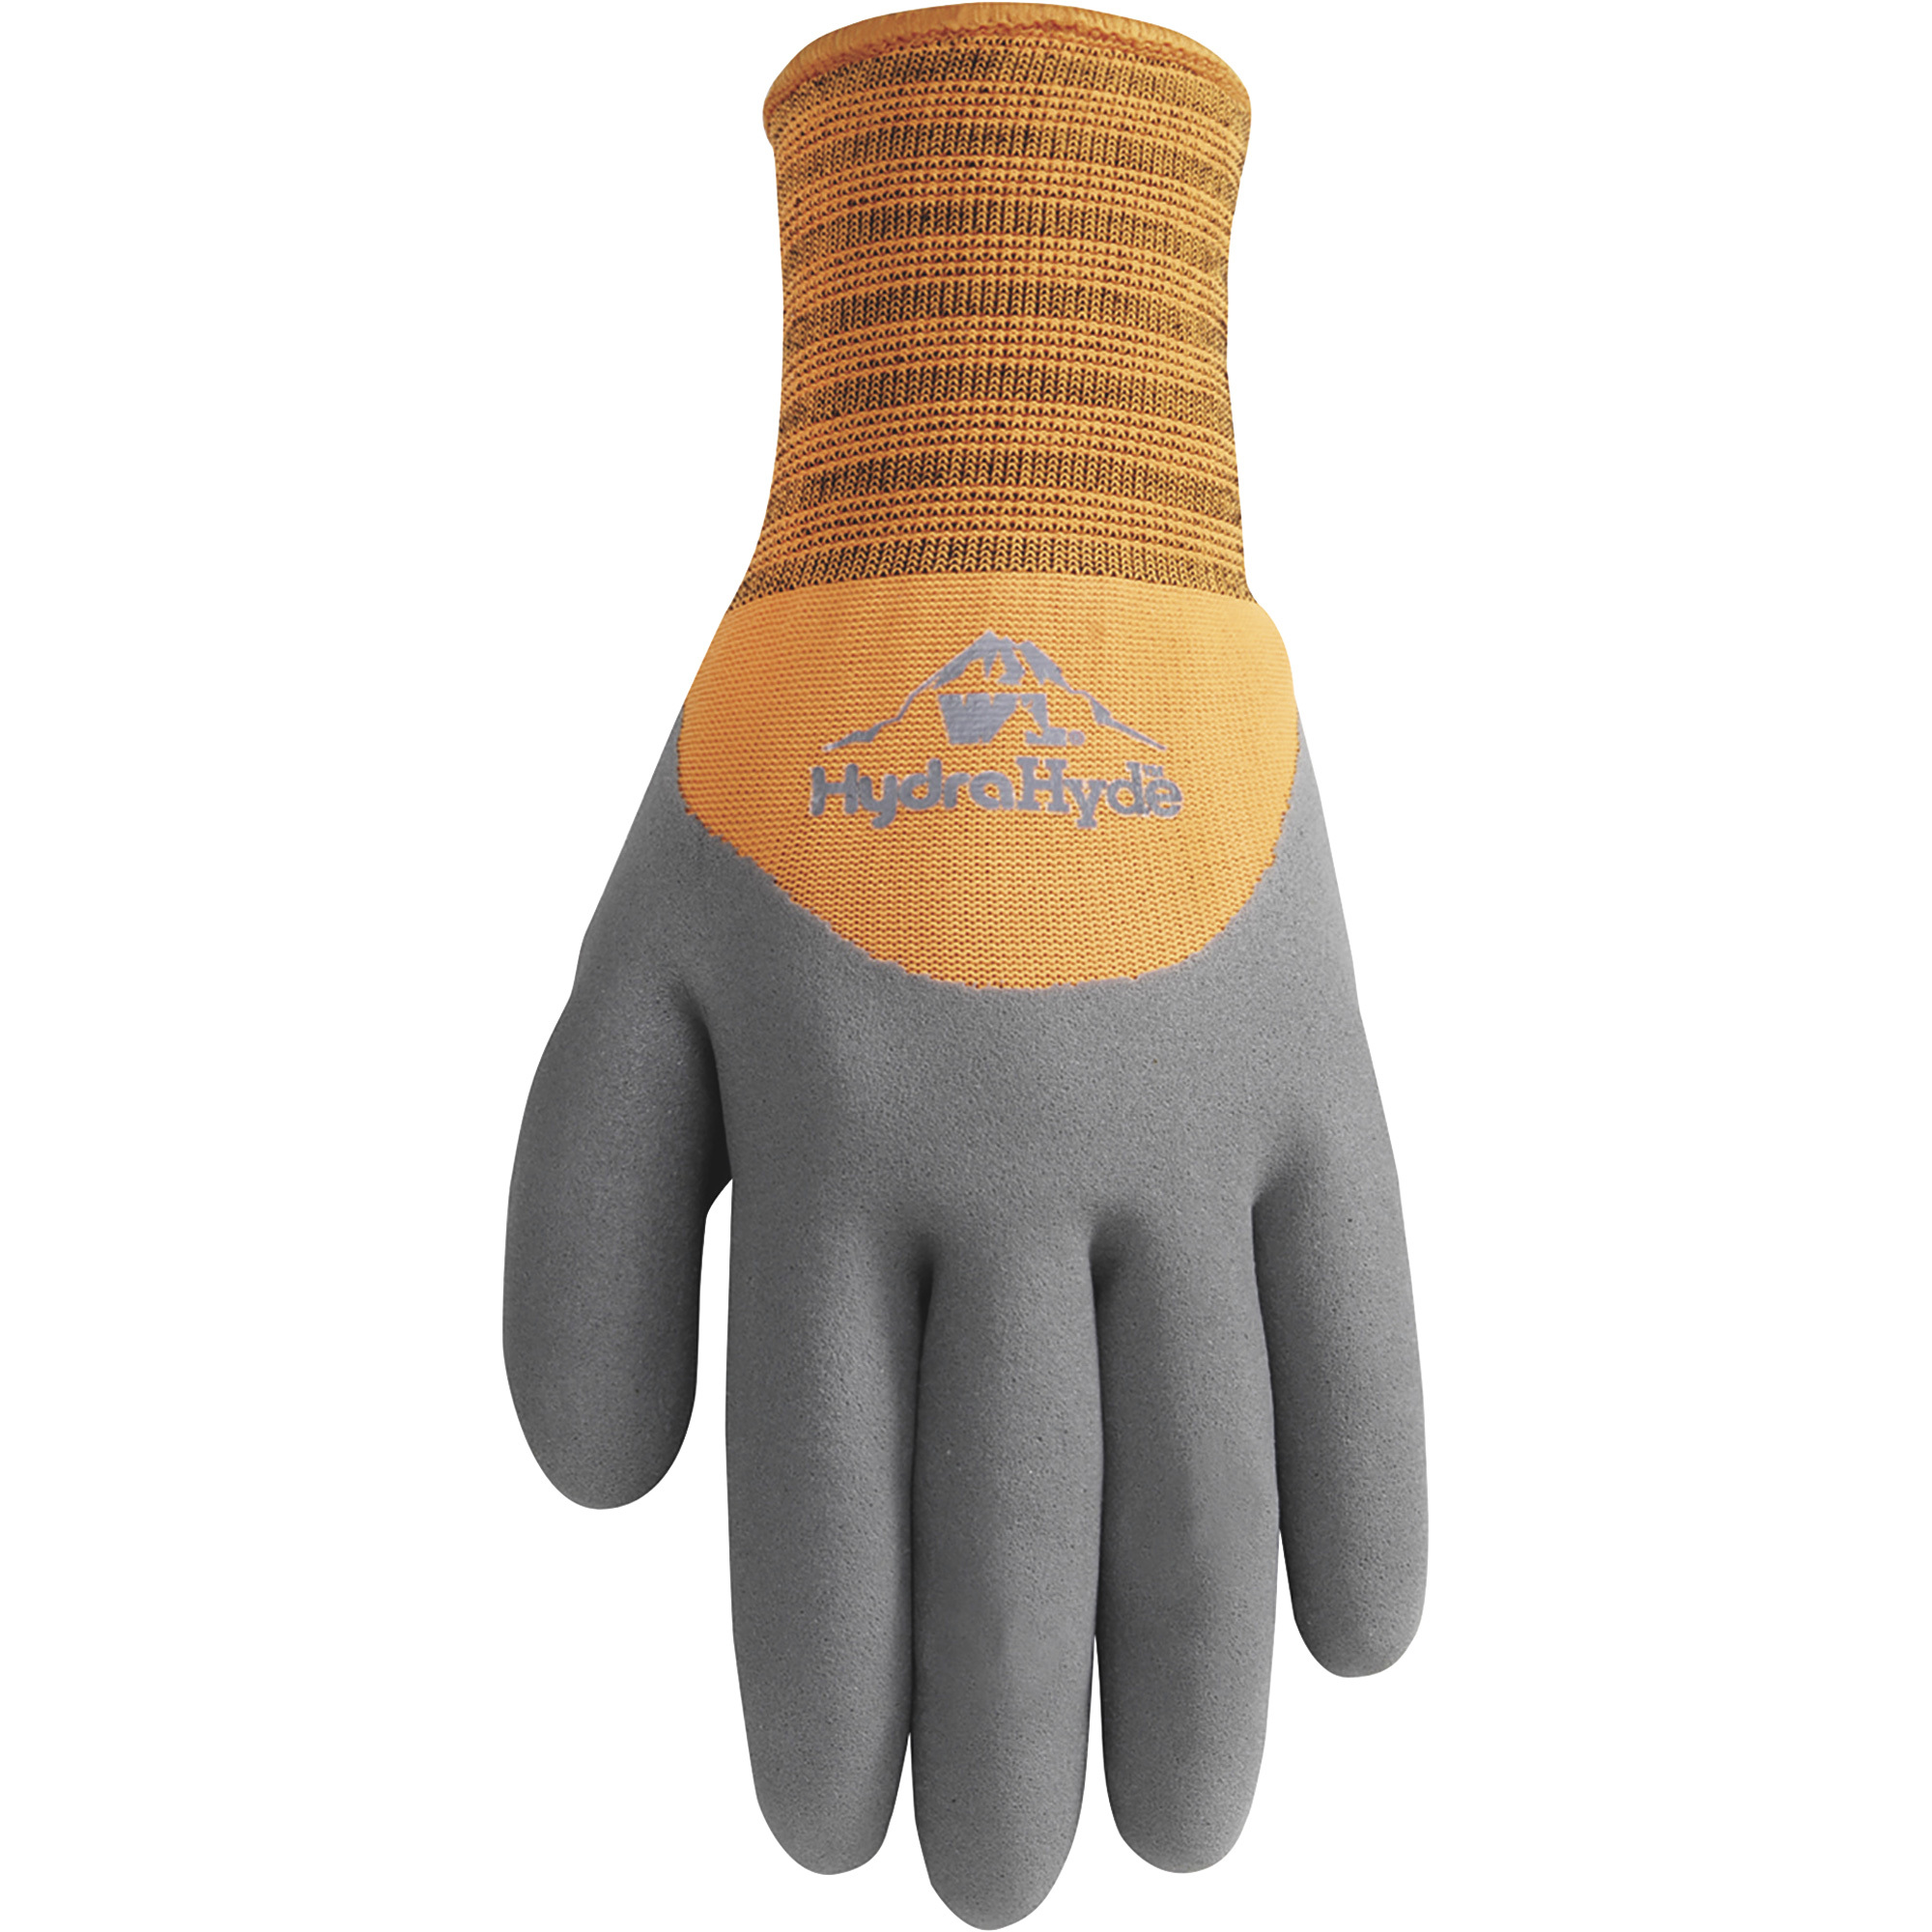 Wells Lamont Men's High Visibility HydraHyde Water-Resistant Lined Work Gloves â Orange, Large